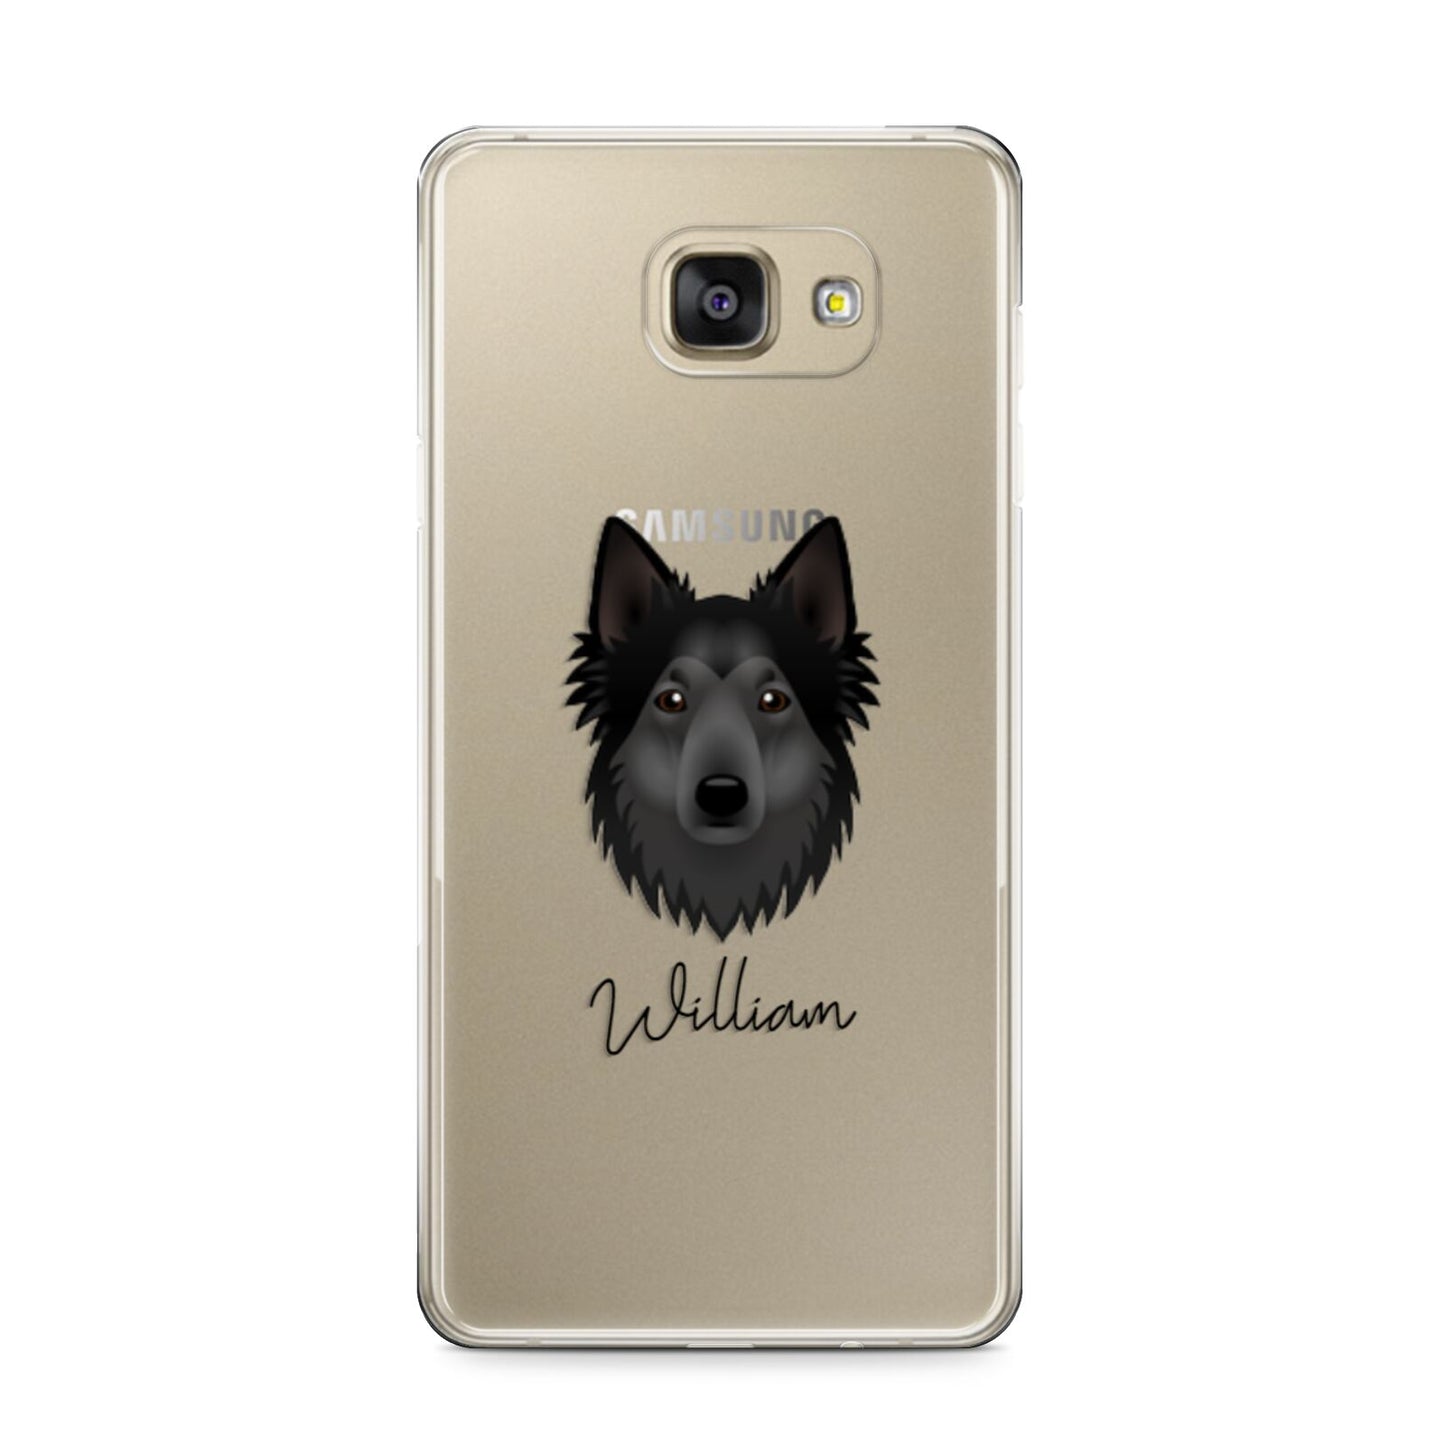 Shollie Personalised Samsung Galaxy A9 2016 Case on gold phone